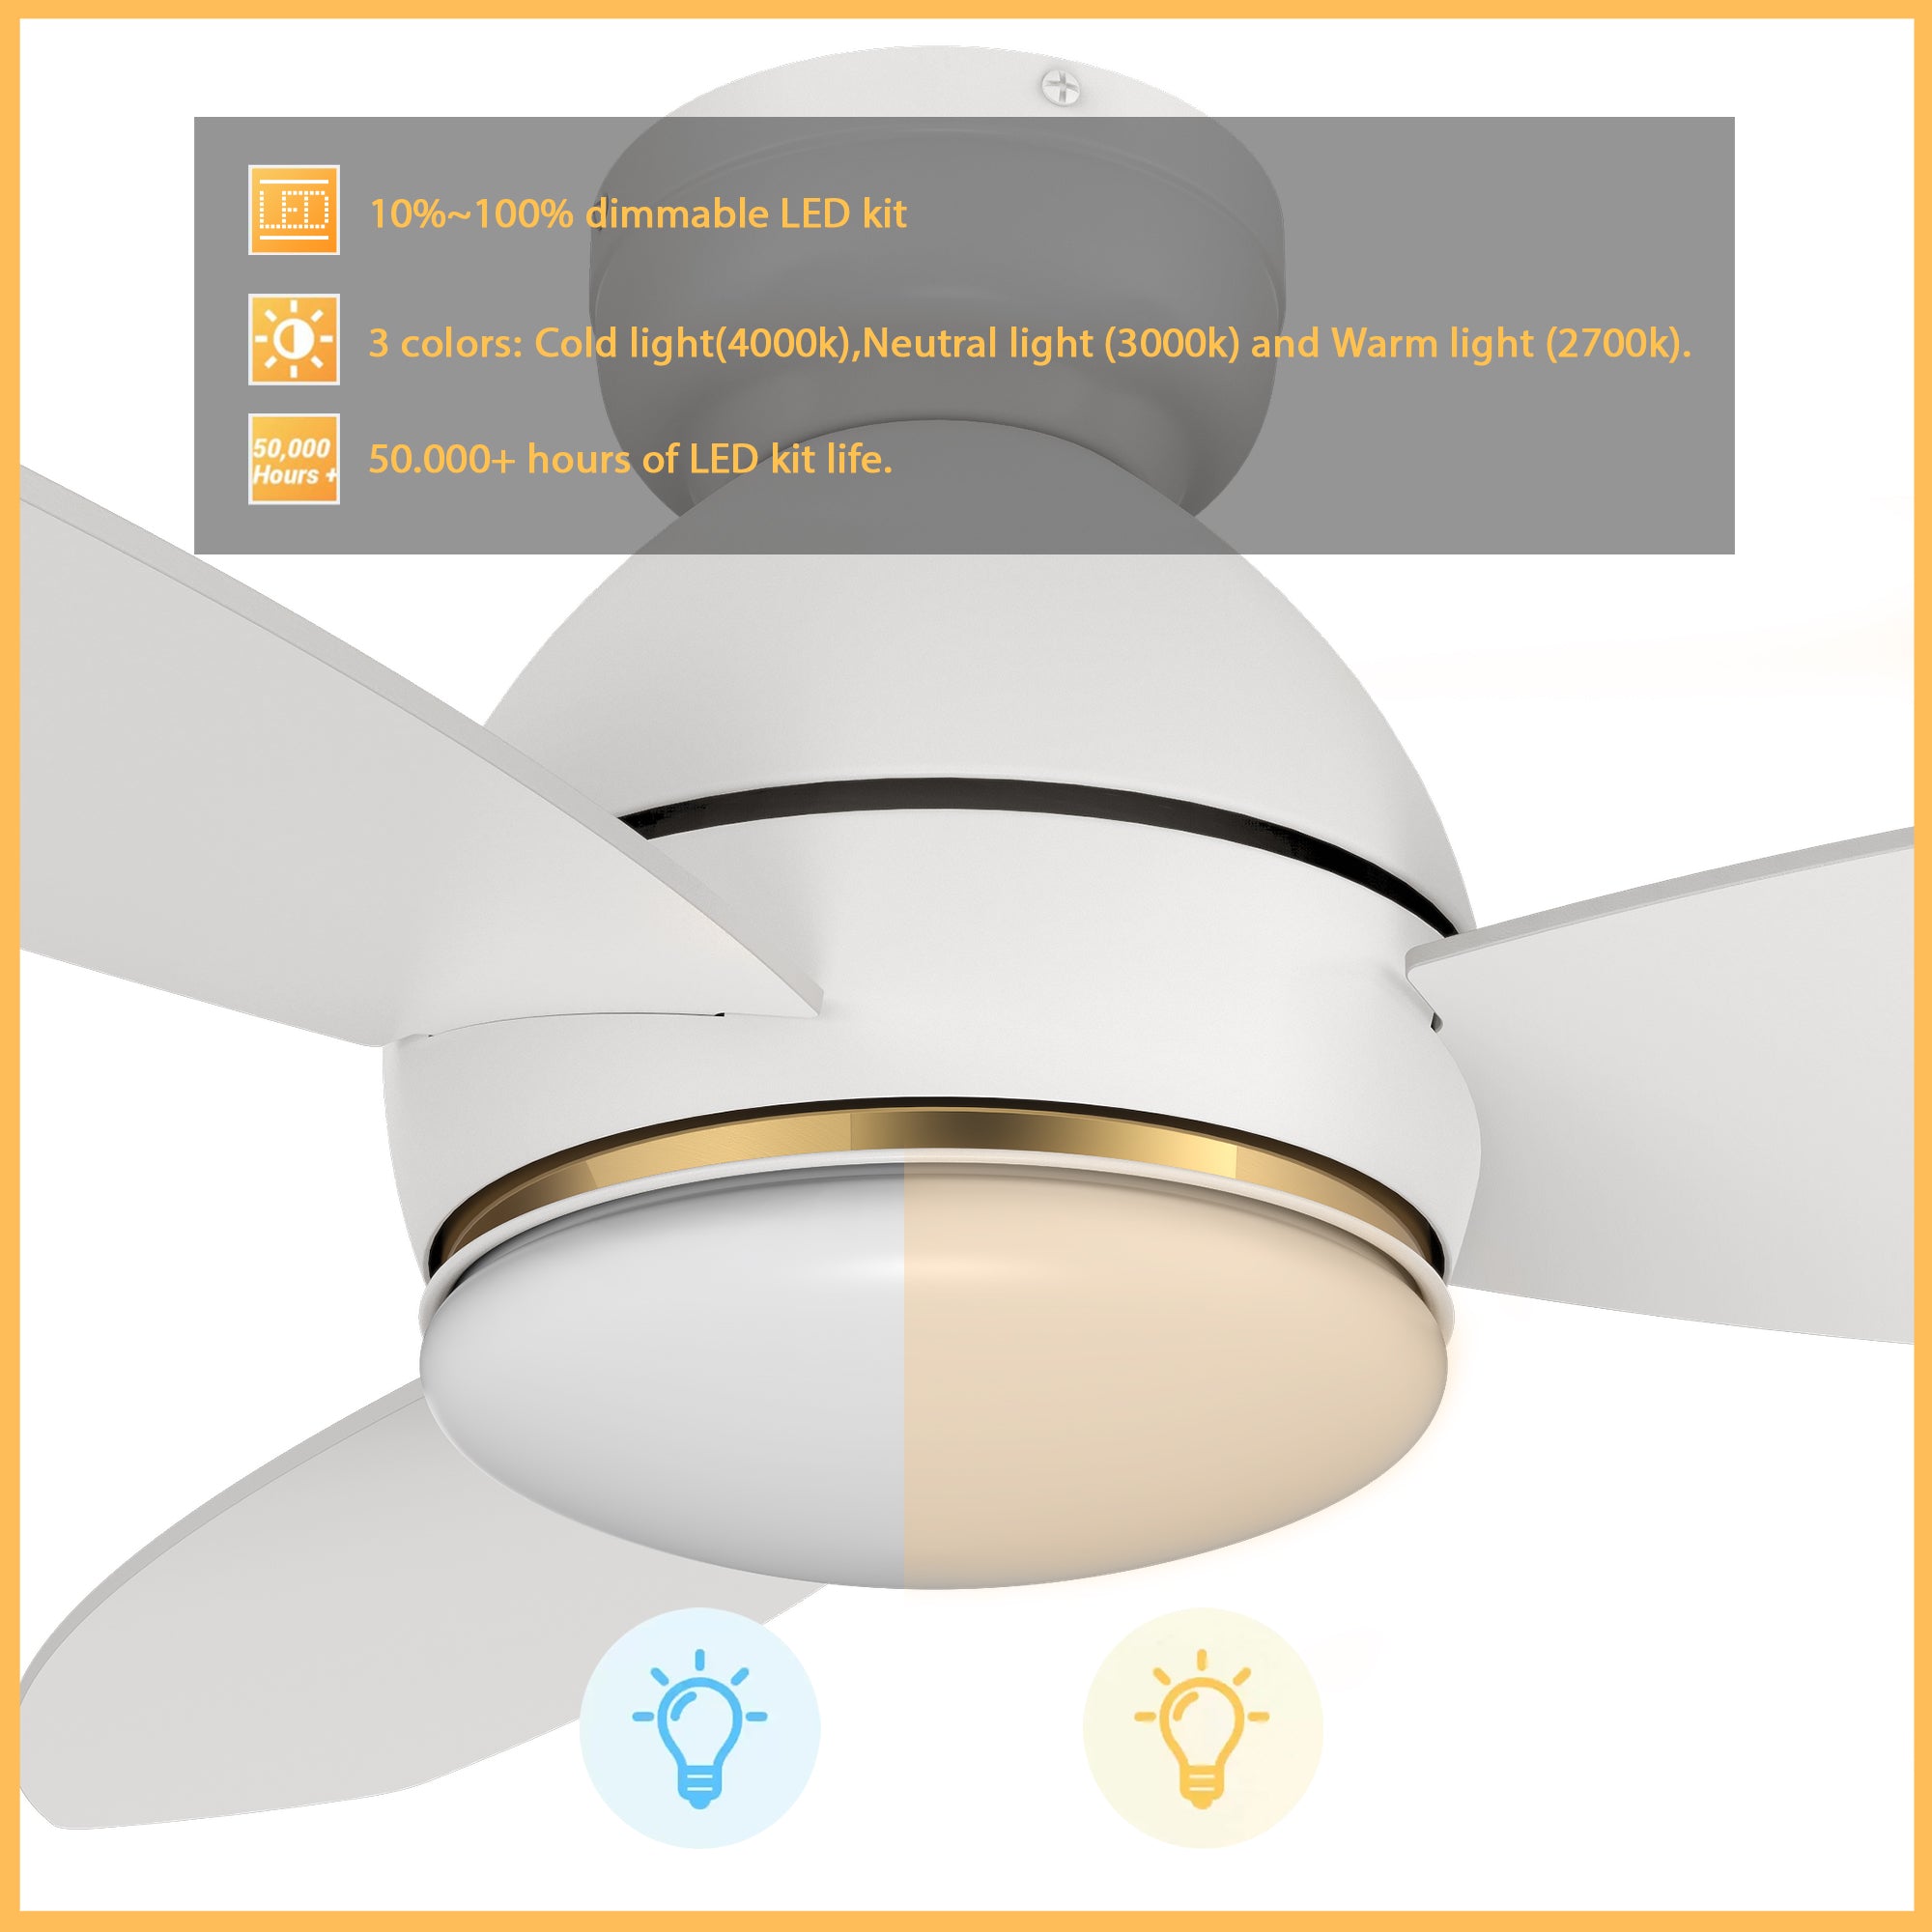 This Bretton 48&#39;&#39; smart ceiling fan keeps your space cool, bright, and stylish. It is a soft modern masterpiece perfect for your large living spaces. This Wifi smart ceiling fan is a simplicity designing with White finish, use elegant Plywood blades and has an integrated 4000K LED daylight. The fan features Remote control, Wi-Fi apps, Siri Shortcut and Voice control technology (compatible with Amazon Alexa and Google Home Assistant ) to set fan preferences. 